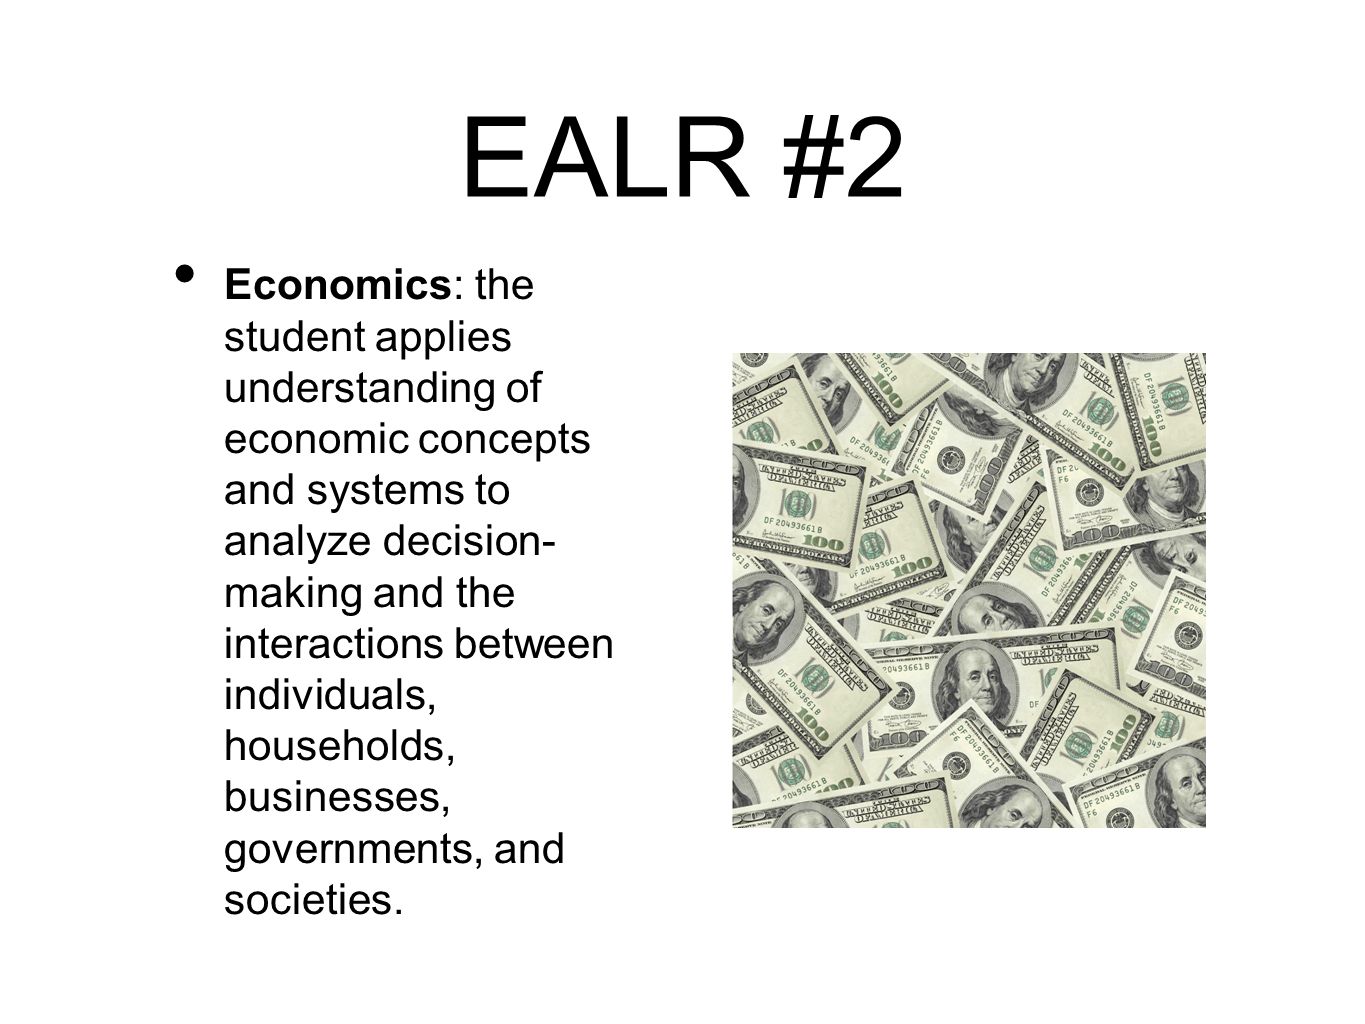 EALR #2 Economics: the student applies understanding of economic concepts and systems to analyze decision- making and the interactions between individuals, households, businesses, governments, and societies.